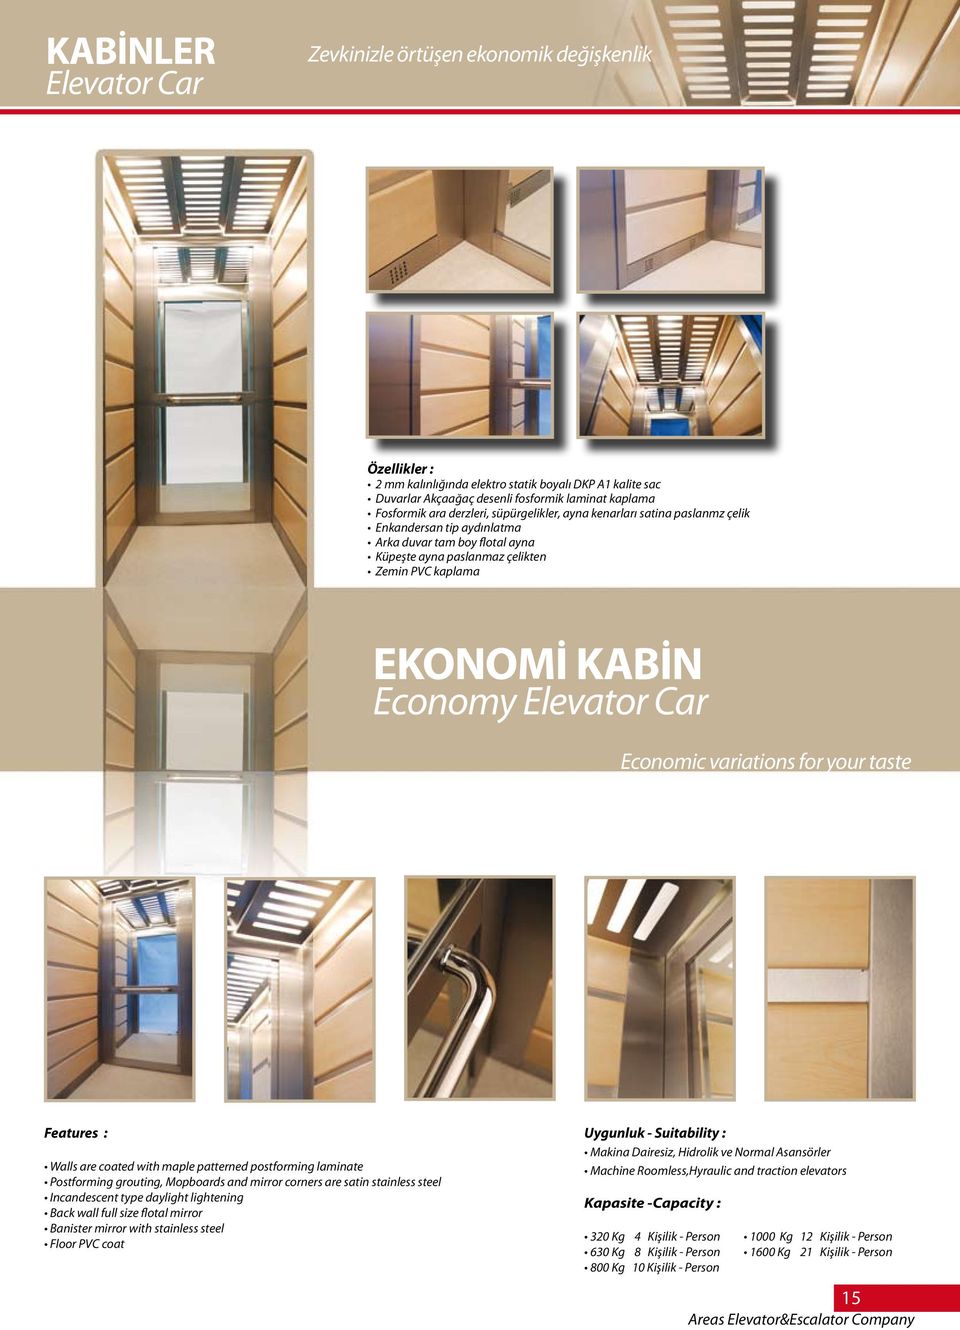 Elevator Car Economic variations for your taste Features : Walls are coated with maple patterned postforming laminate Postforming grouting, Mopboards and mirror corners are satin stainless steel